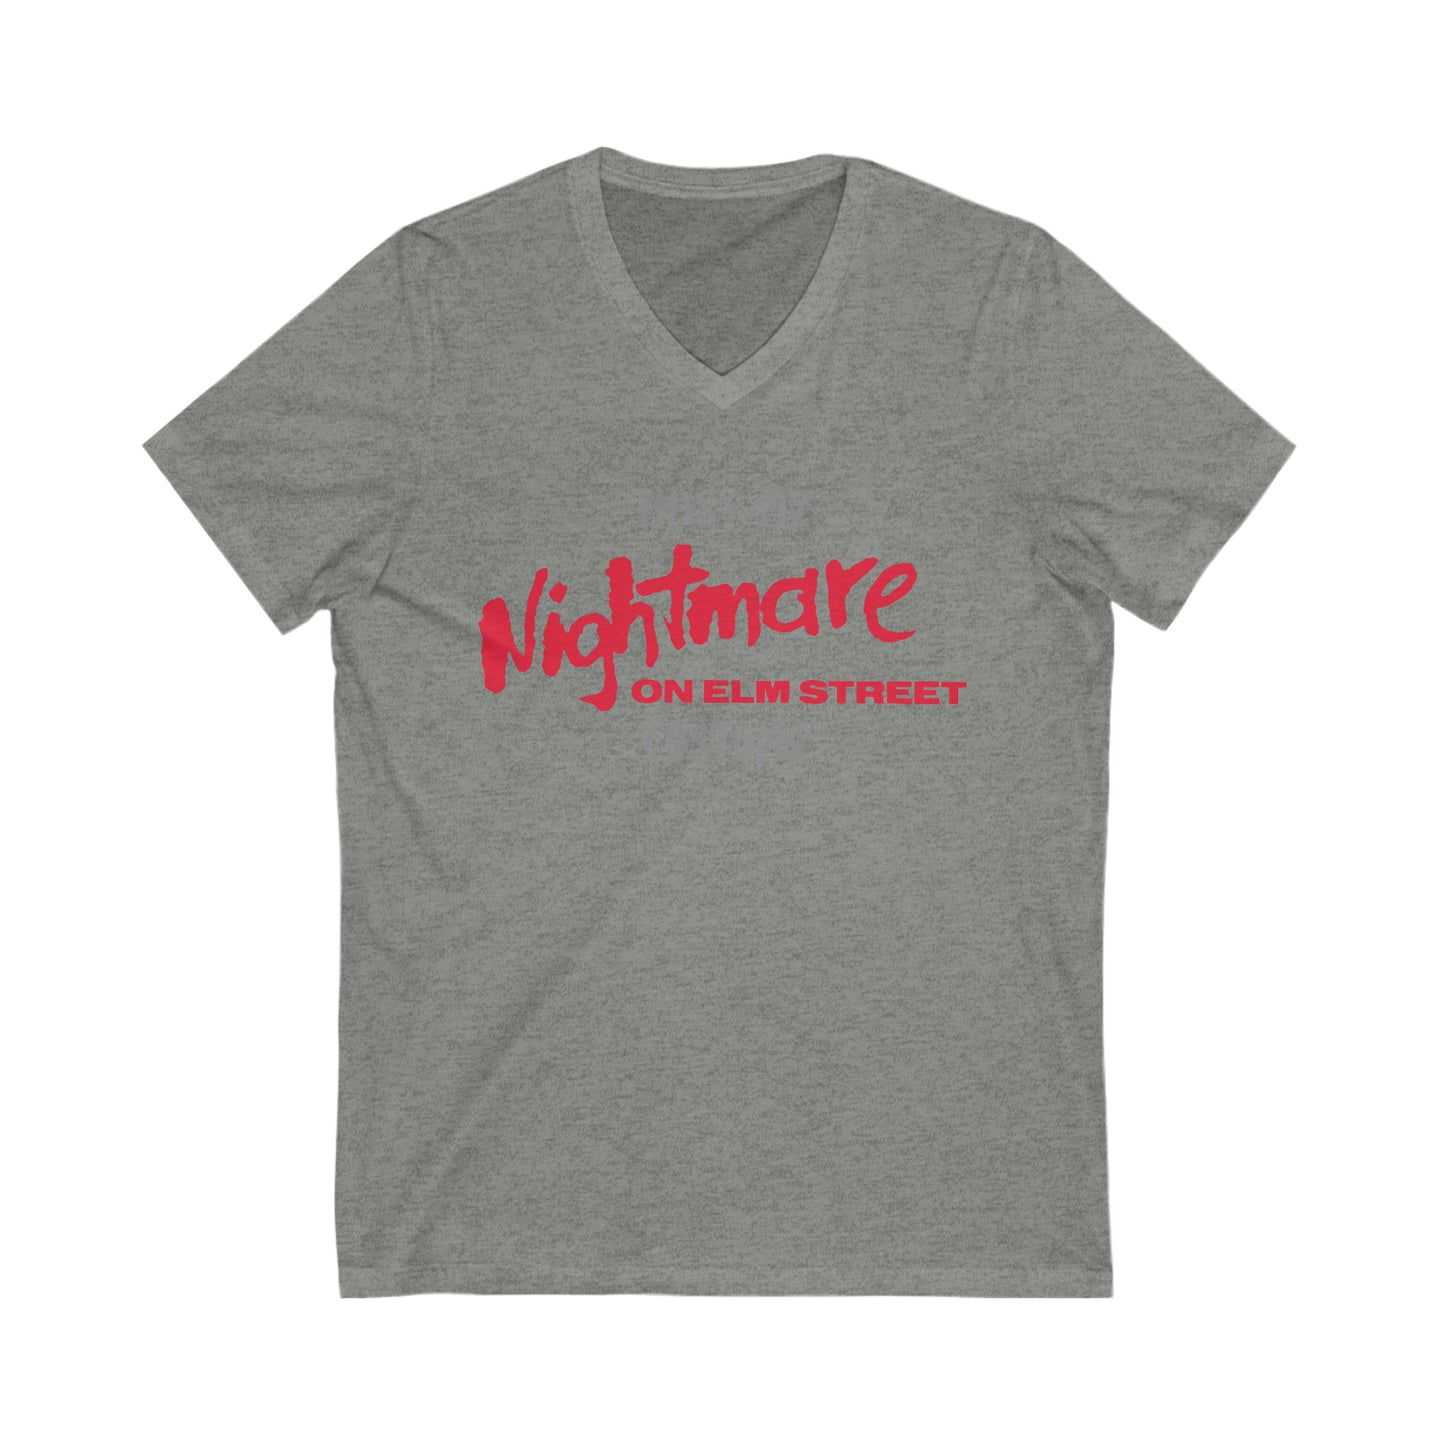 This is My Nightmare On Elm Street Costume Halloween Scary Movie Short Sleeve V Neck T Shirt